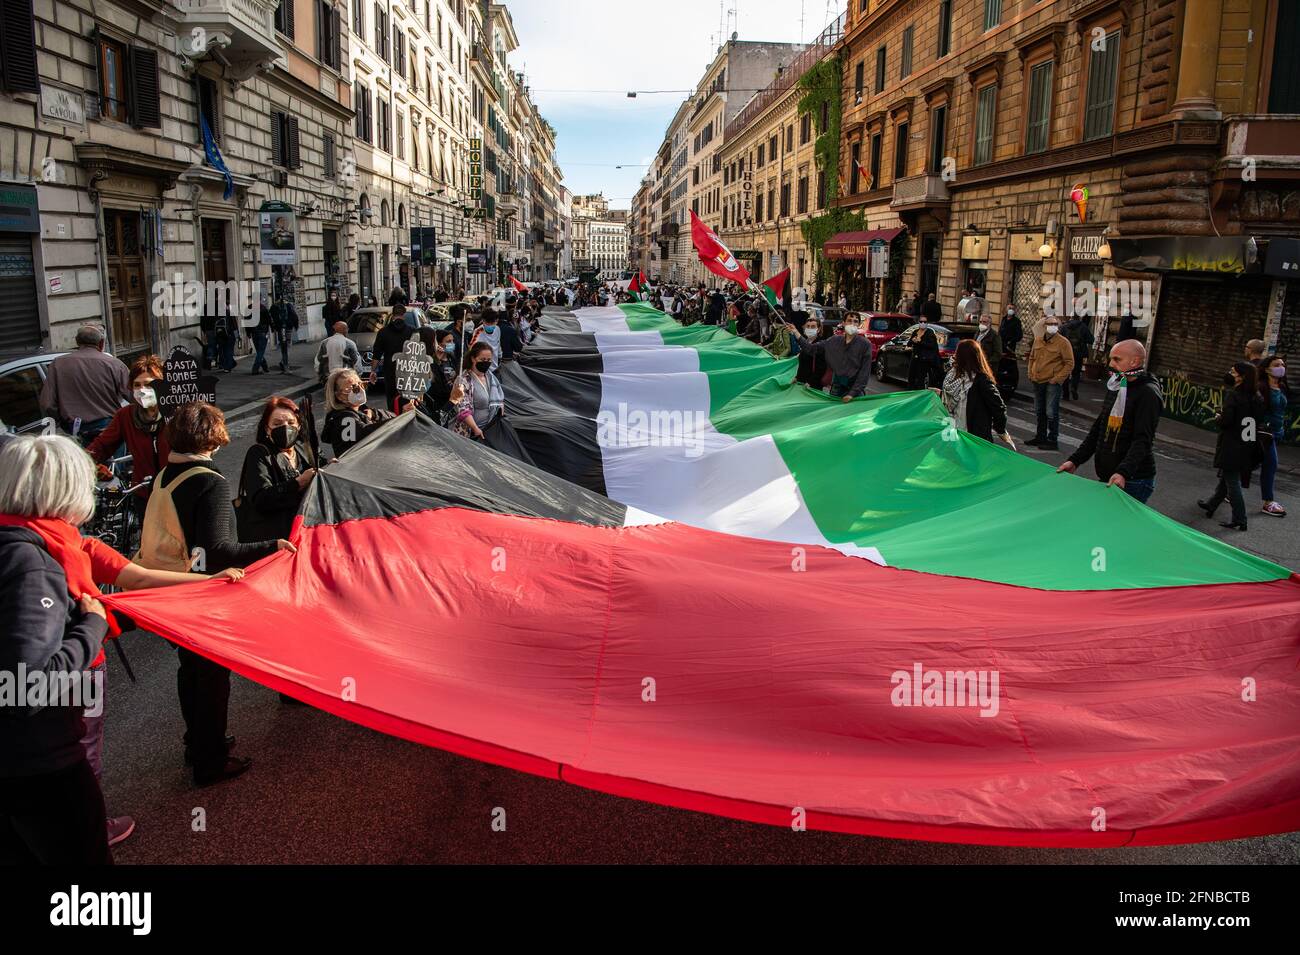 Demonstration of support for the Palestinian people during the Israeli attack on the Gaza Strip. Rome, Italy, May 15, 2021 Stock Photo